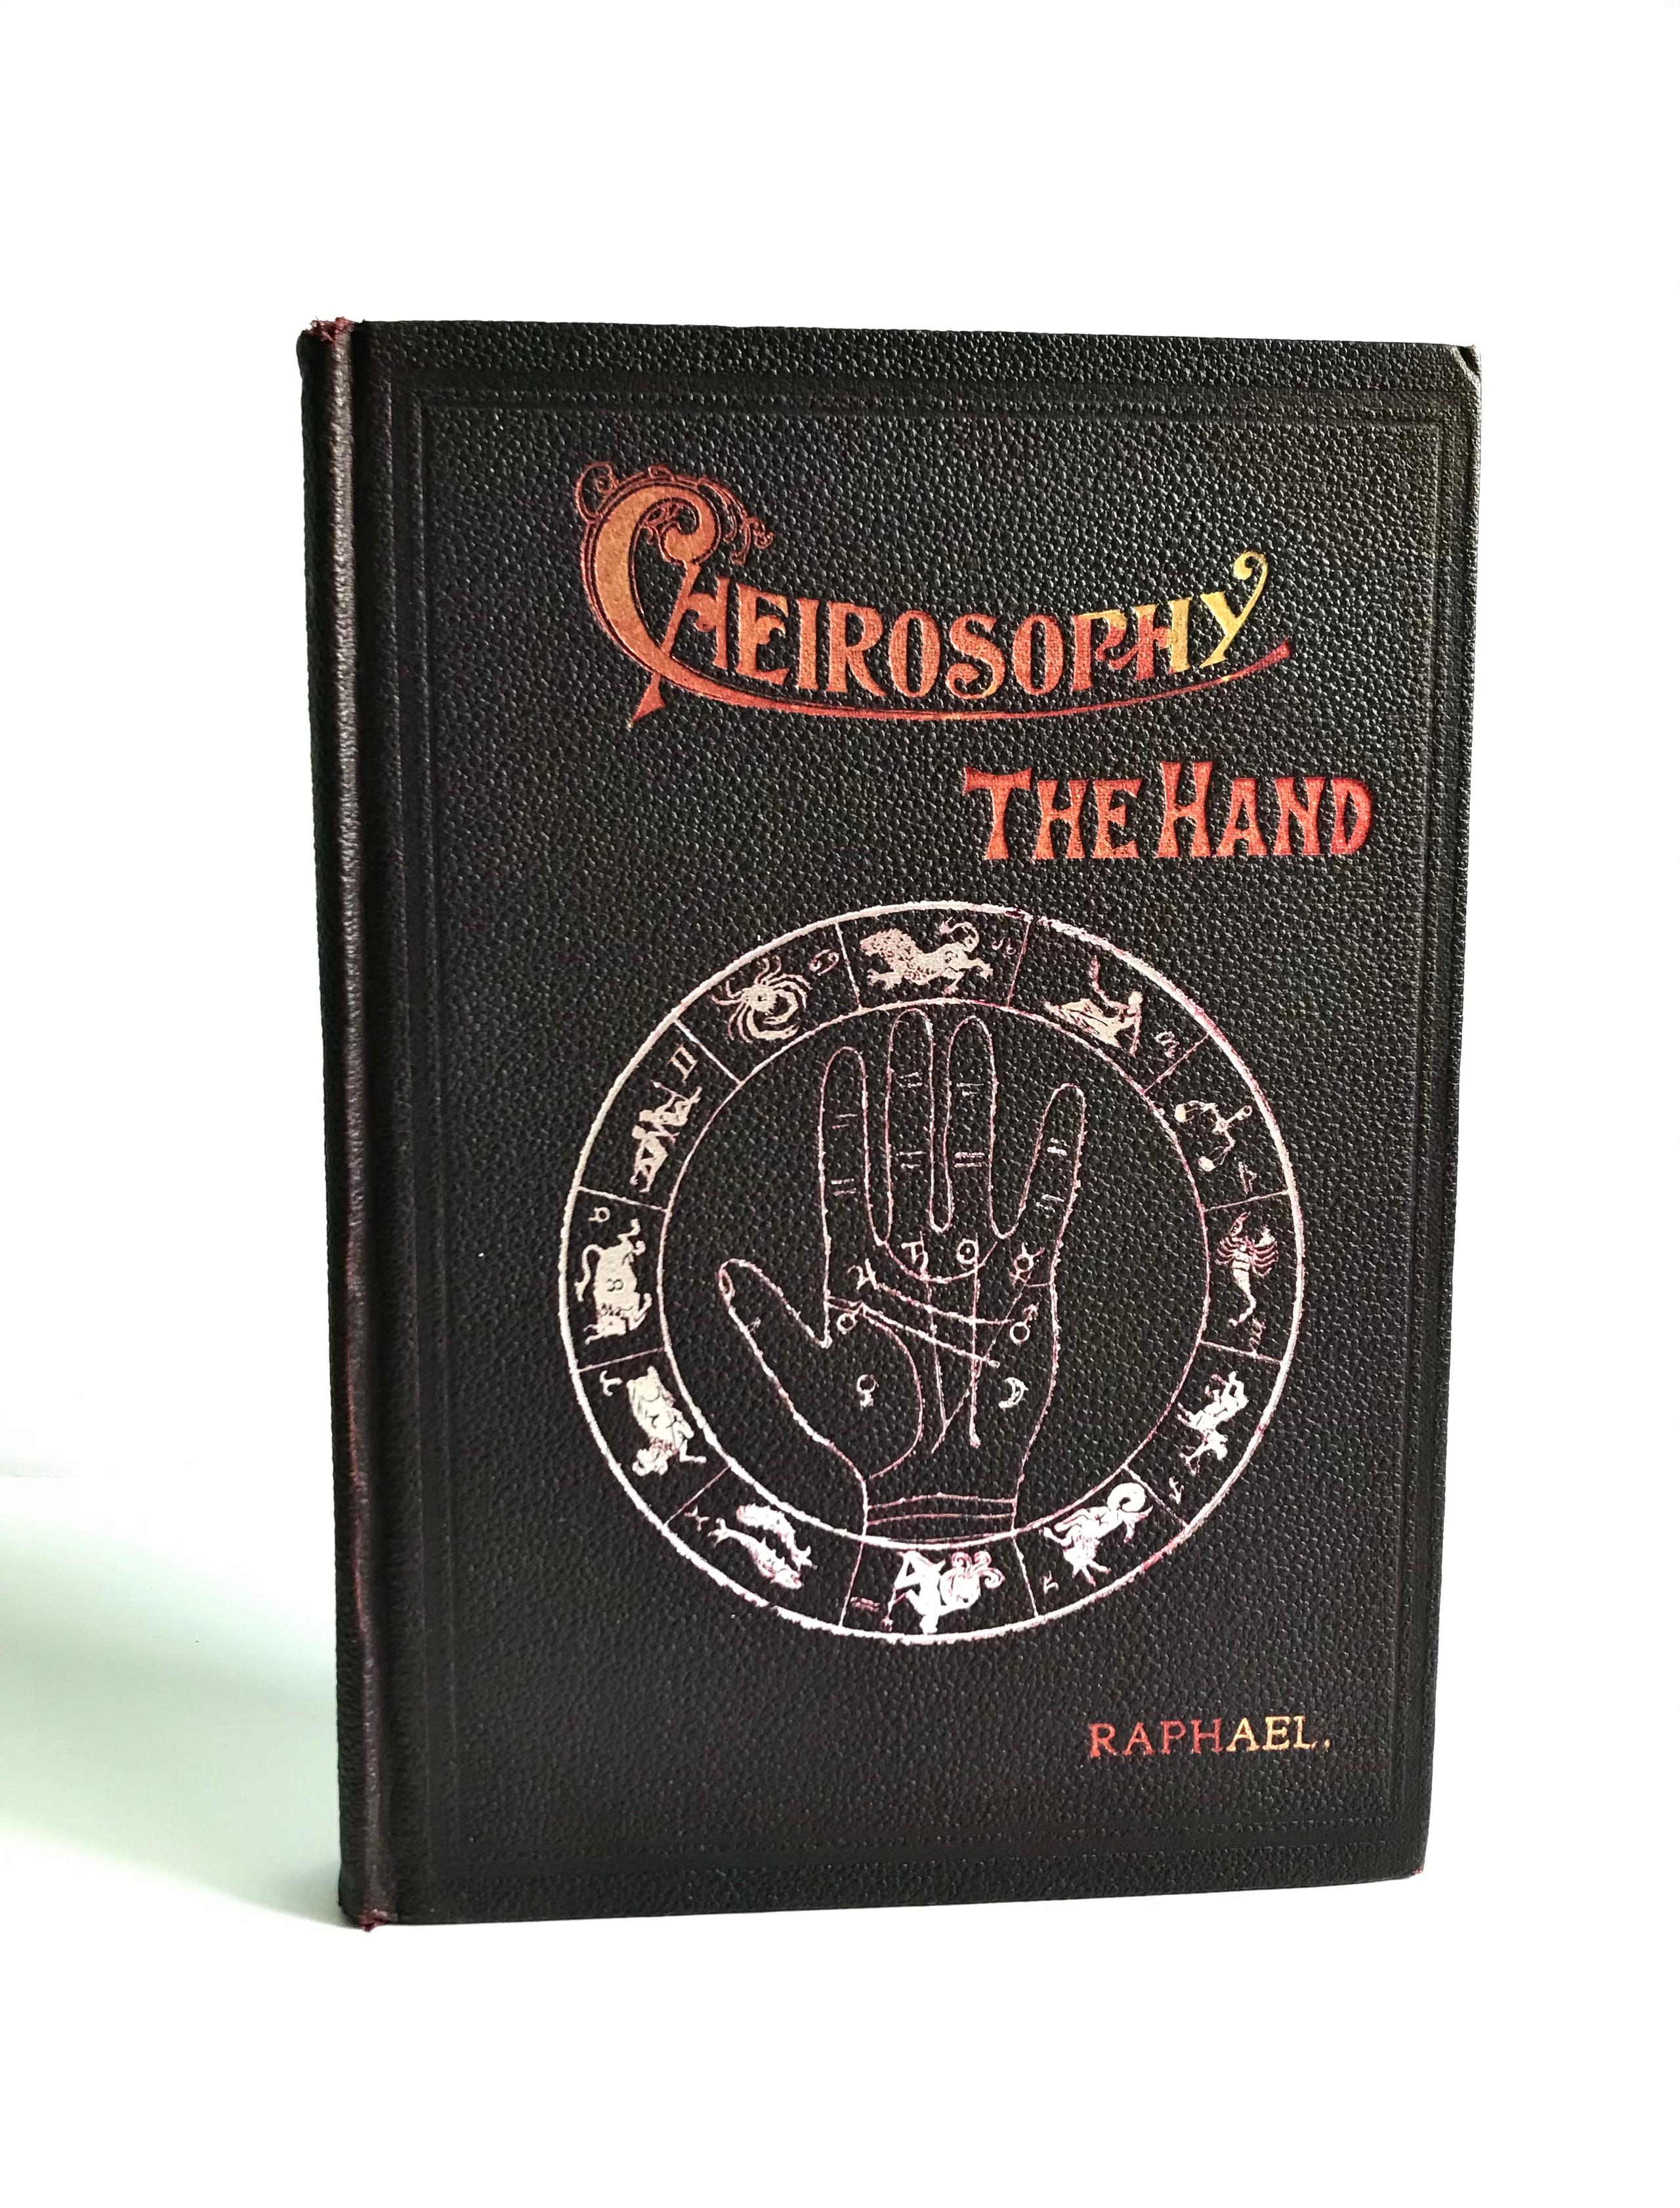 Cheirosophy (The Hand) : A Scientific Treatise On Palmistry by Raphael